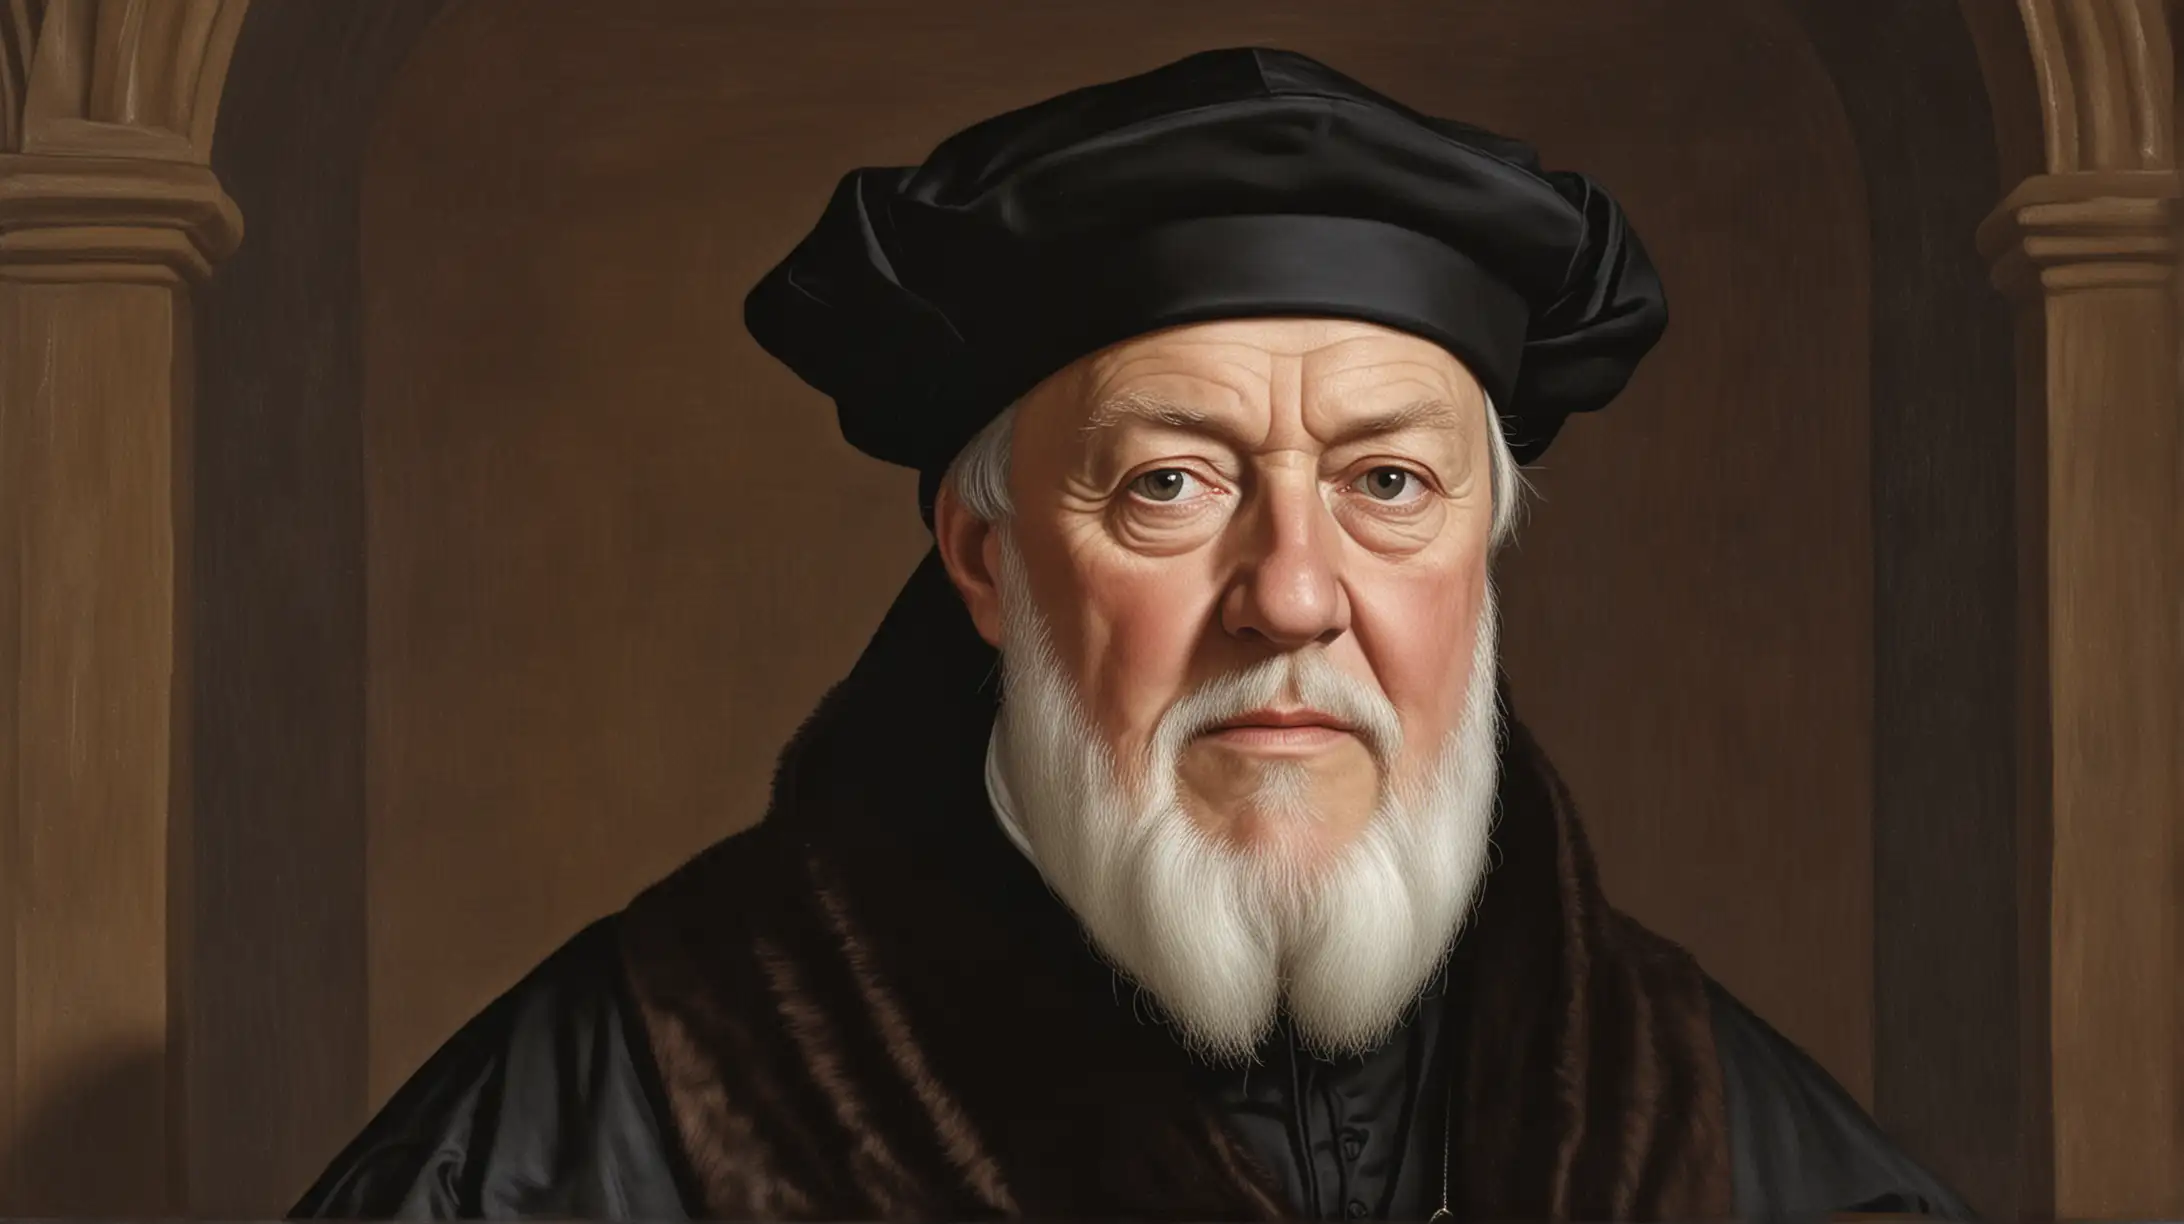 Thomas Cranmer Archbishop of Canterbury under Henry VIII in Ecclesiastical Robes